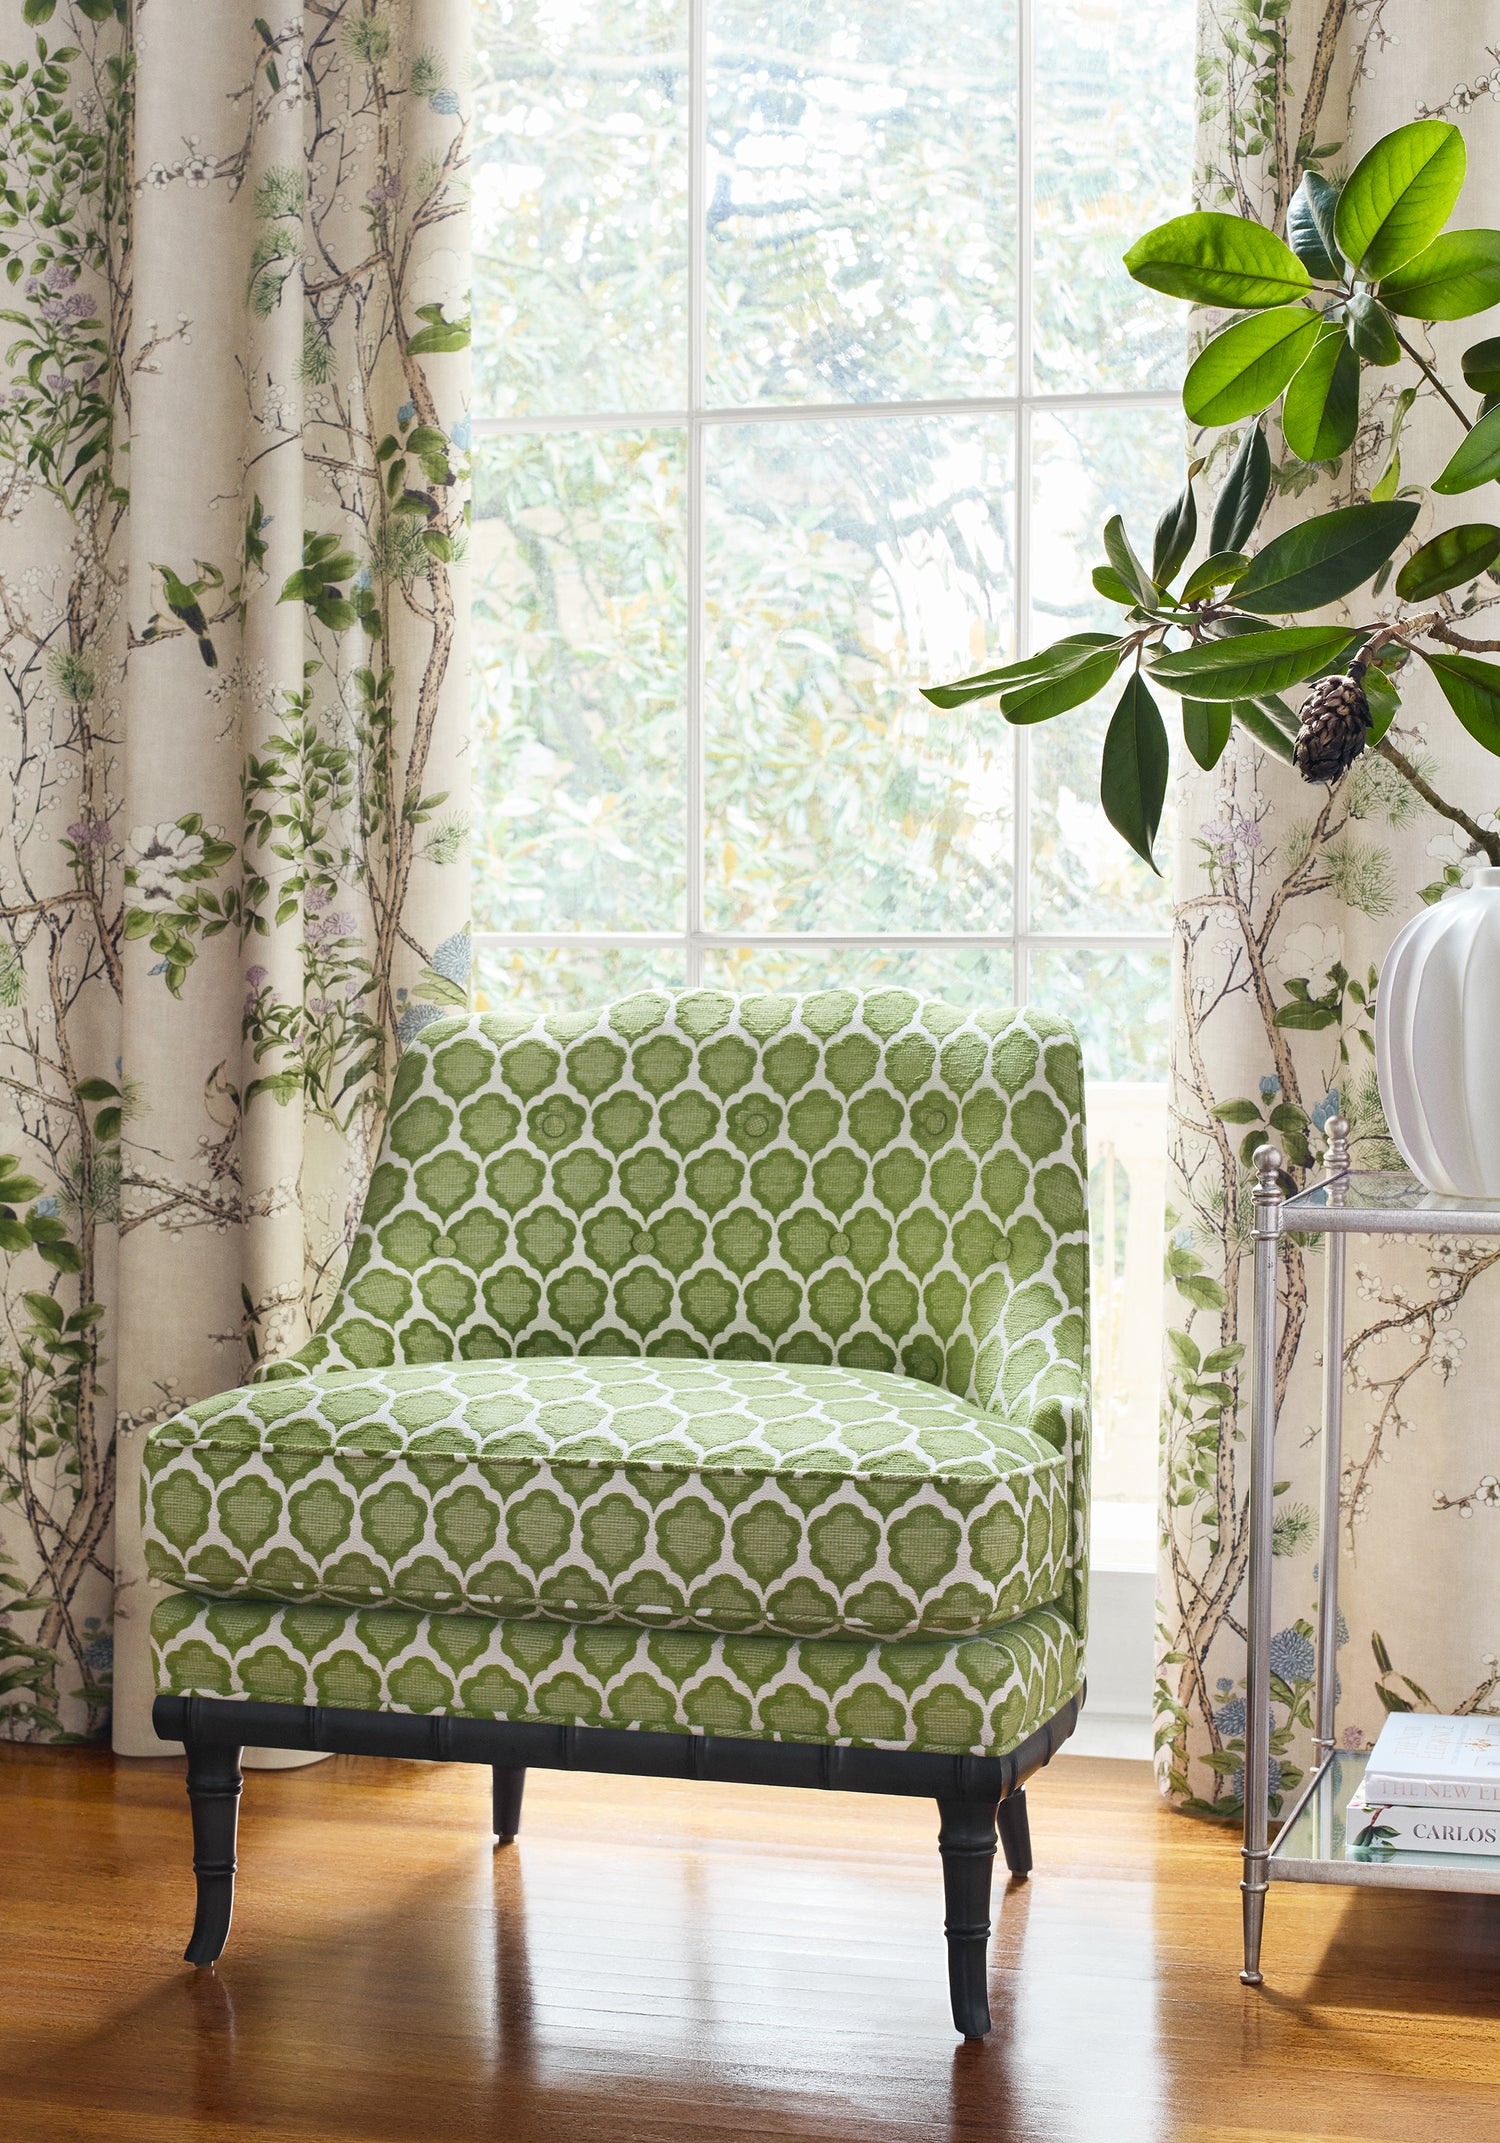 Brentwood Chair in Genie woven fabric in leaf color - pattern number W81930 by Anna French in the Bristol collection